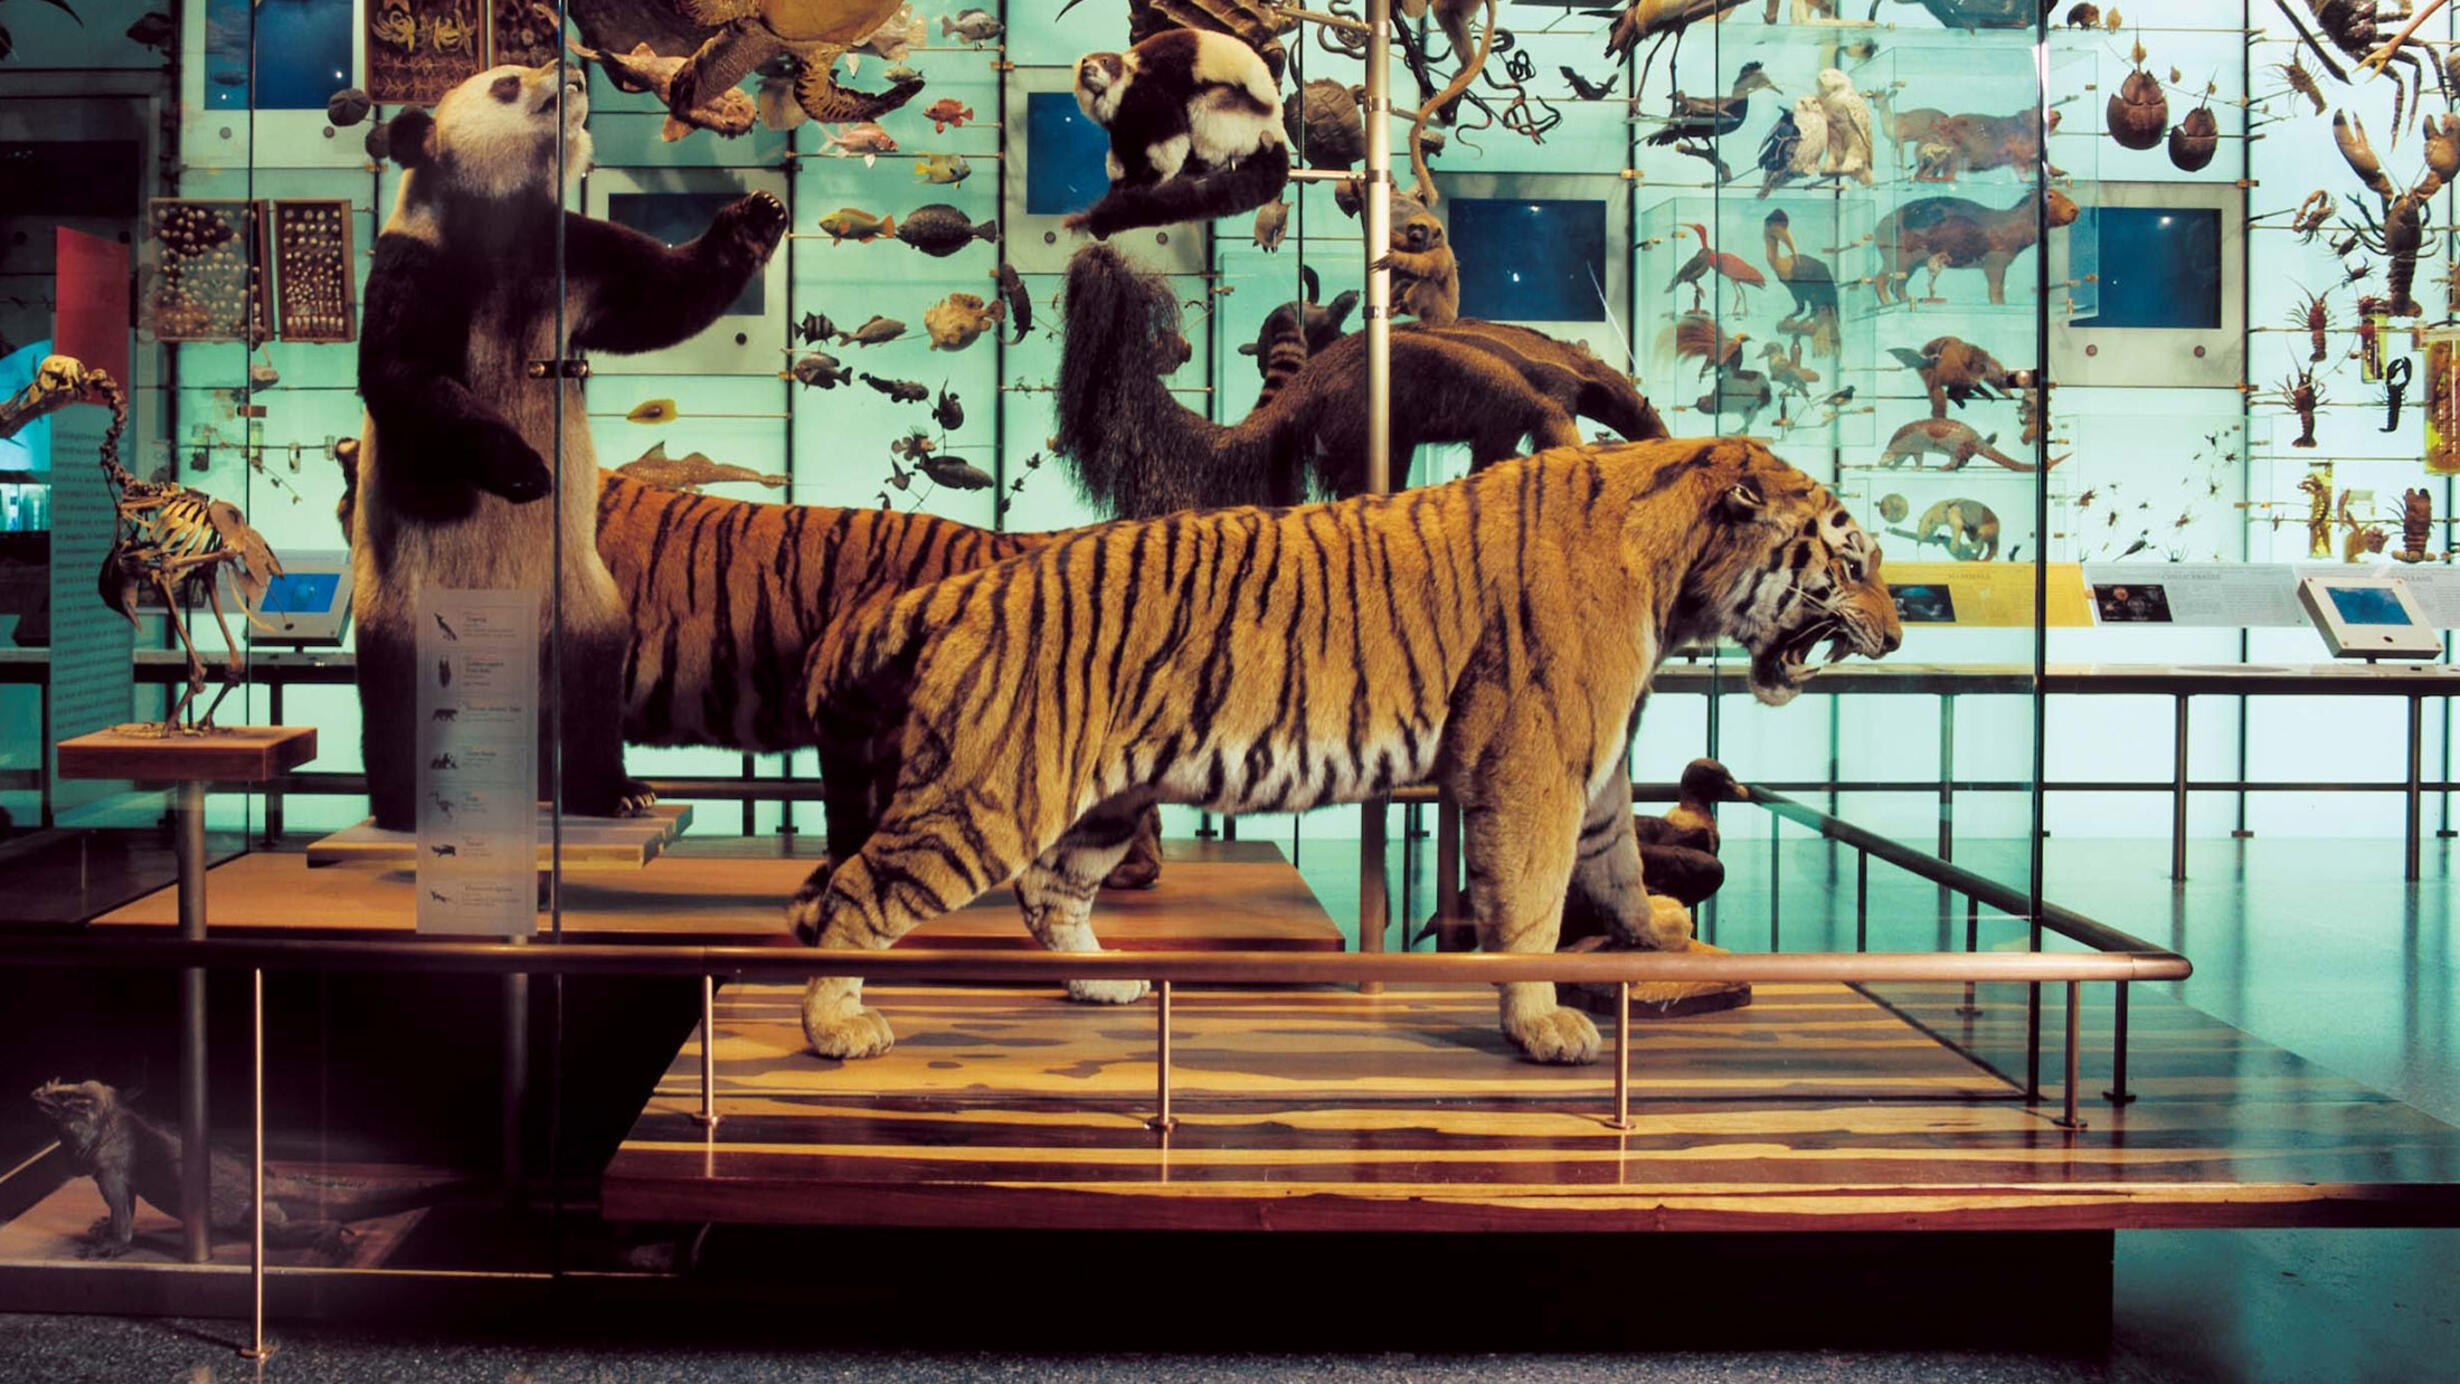 Siberian tiger model displayed in a glass case in the Museum's Hall of Biodiversity.